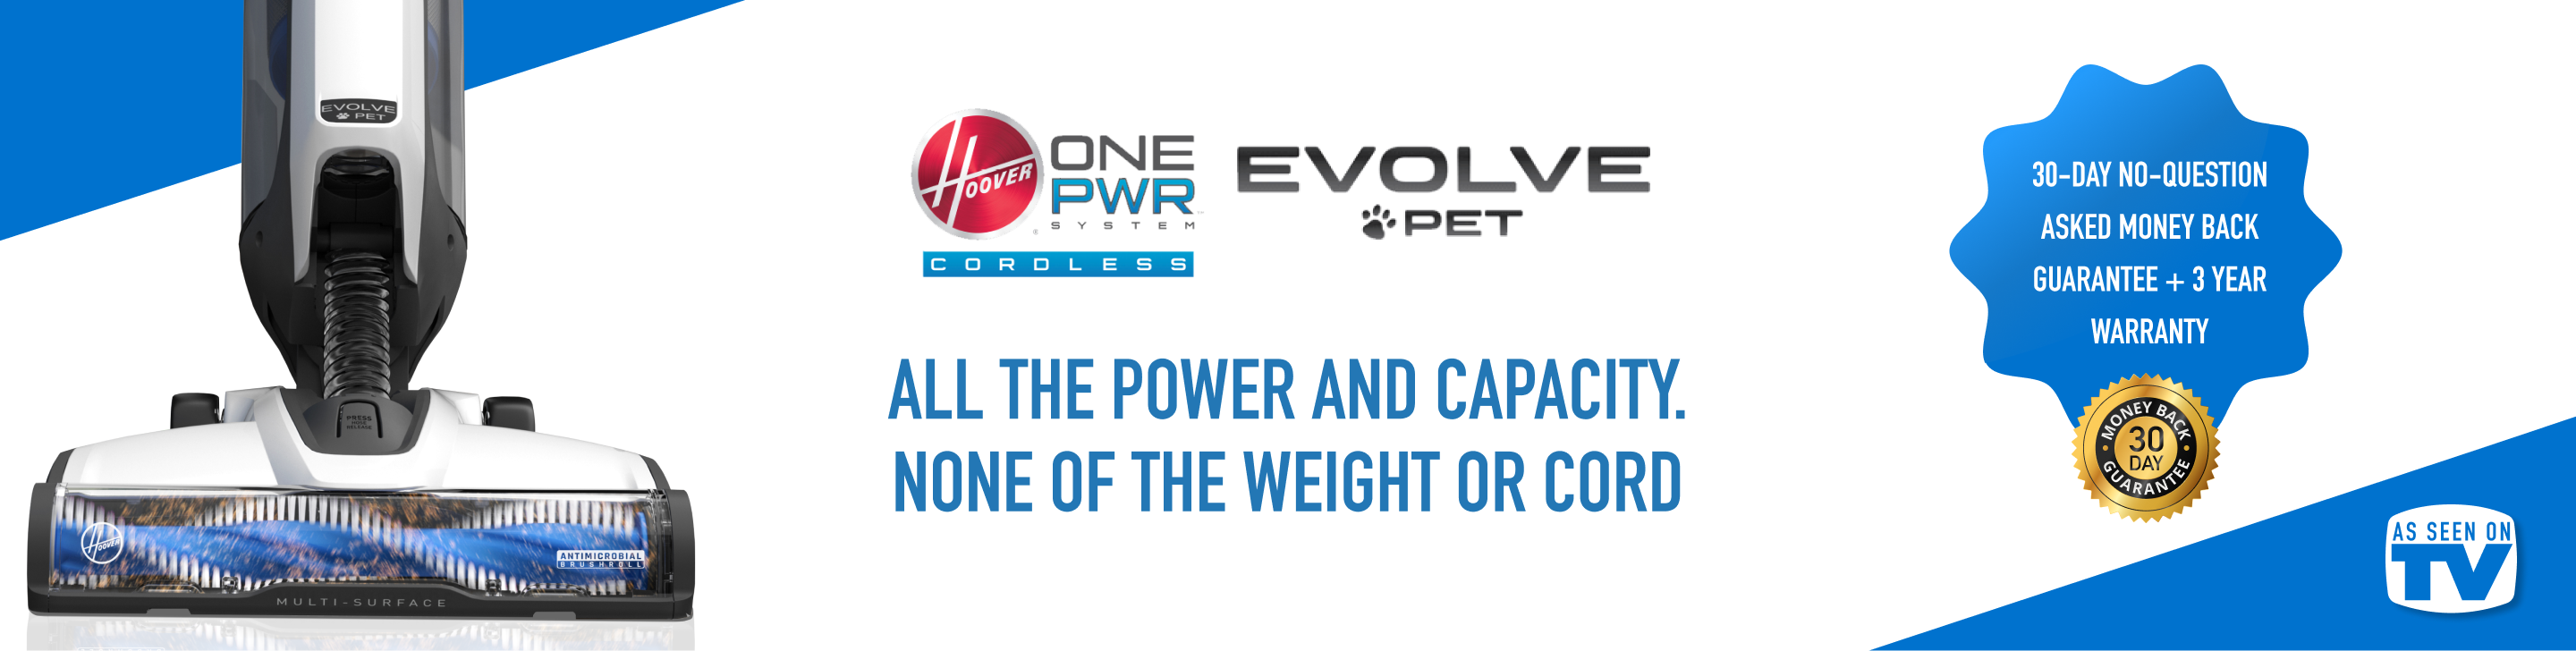 Hoover ONEPWR™ Evolve Pet Cordless Vacuum